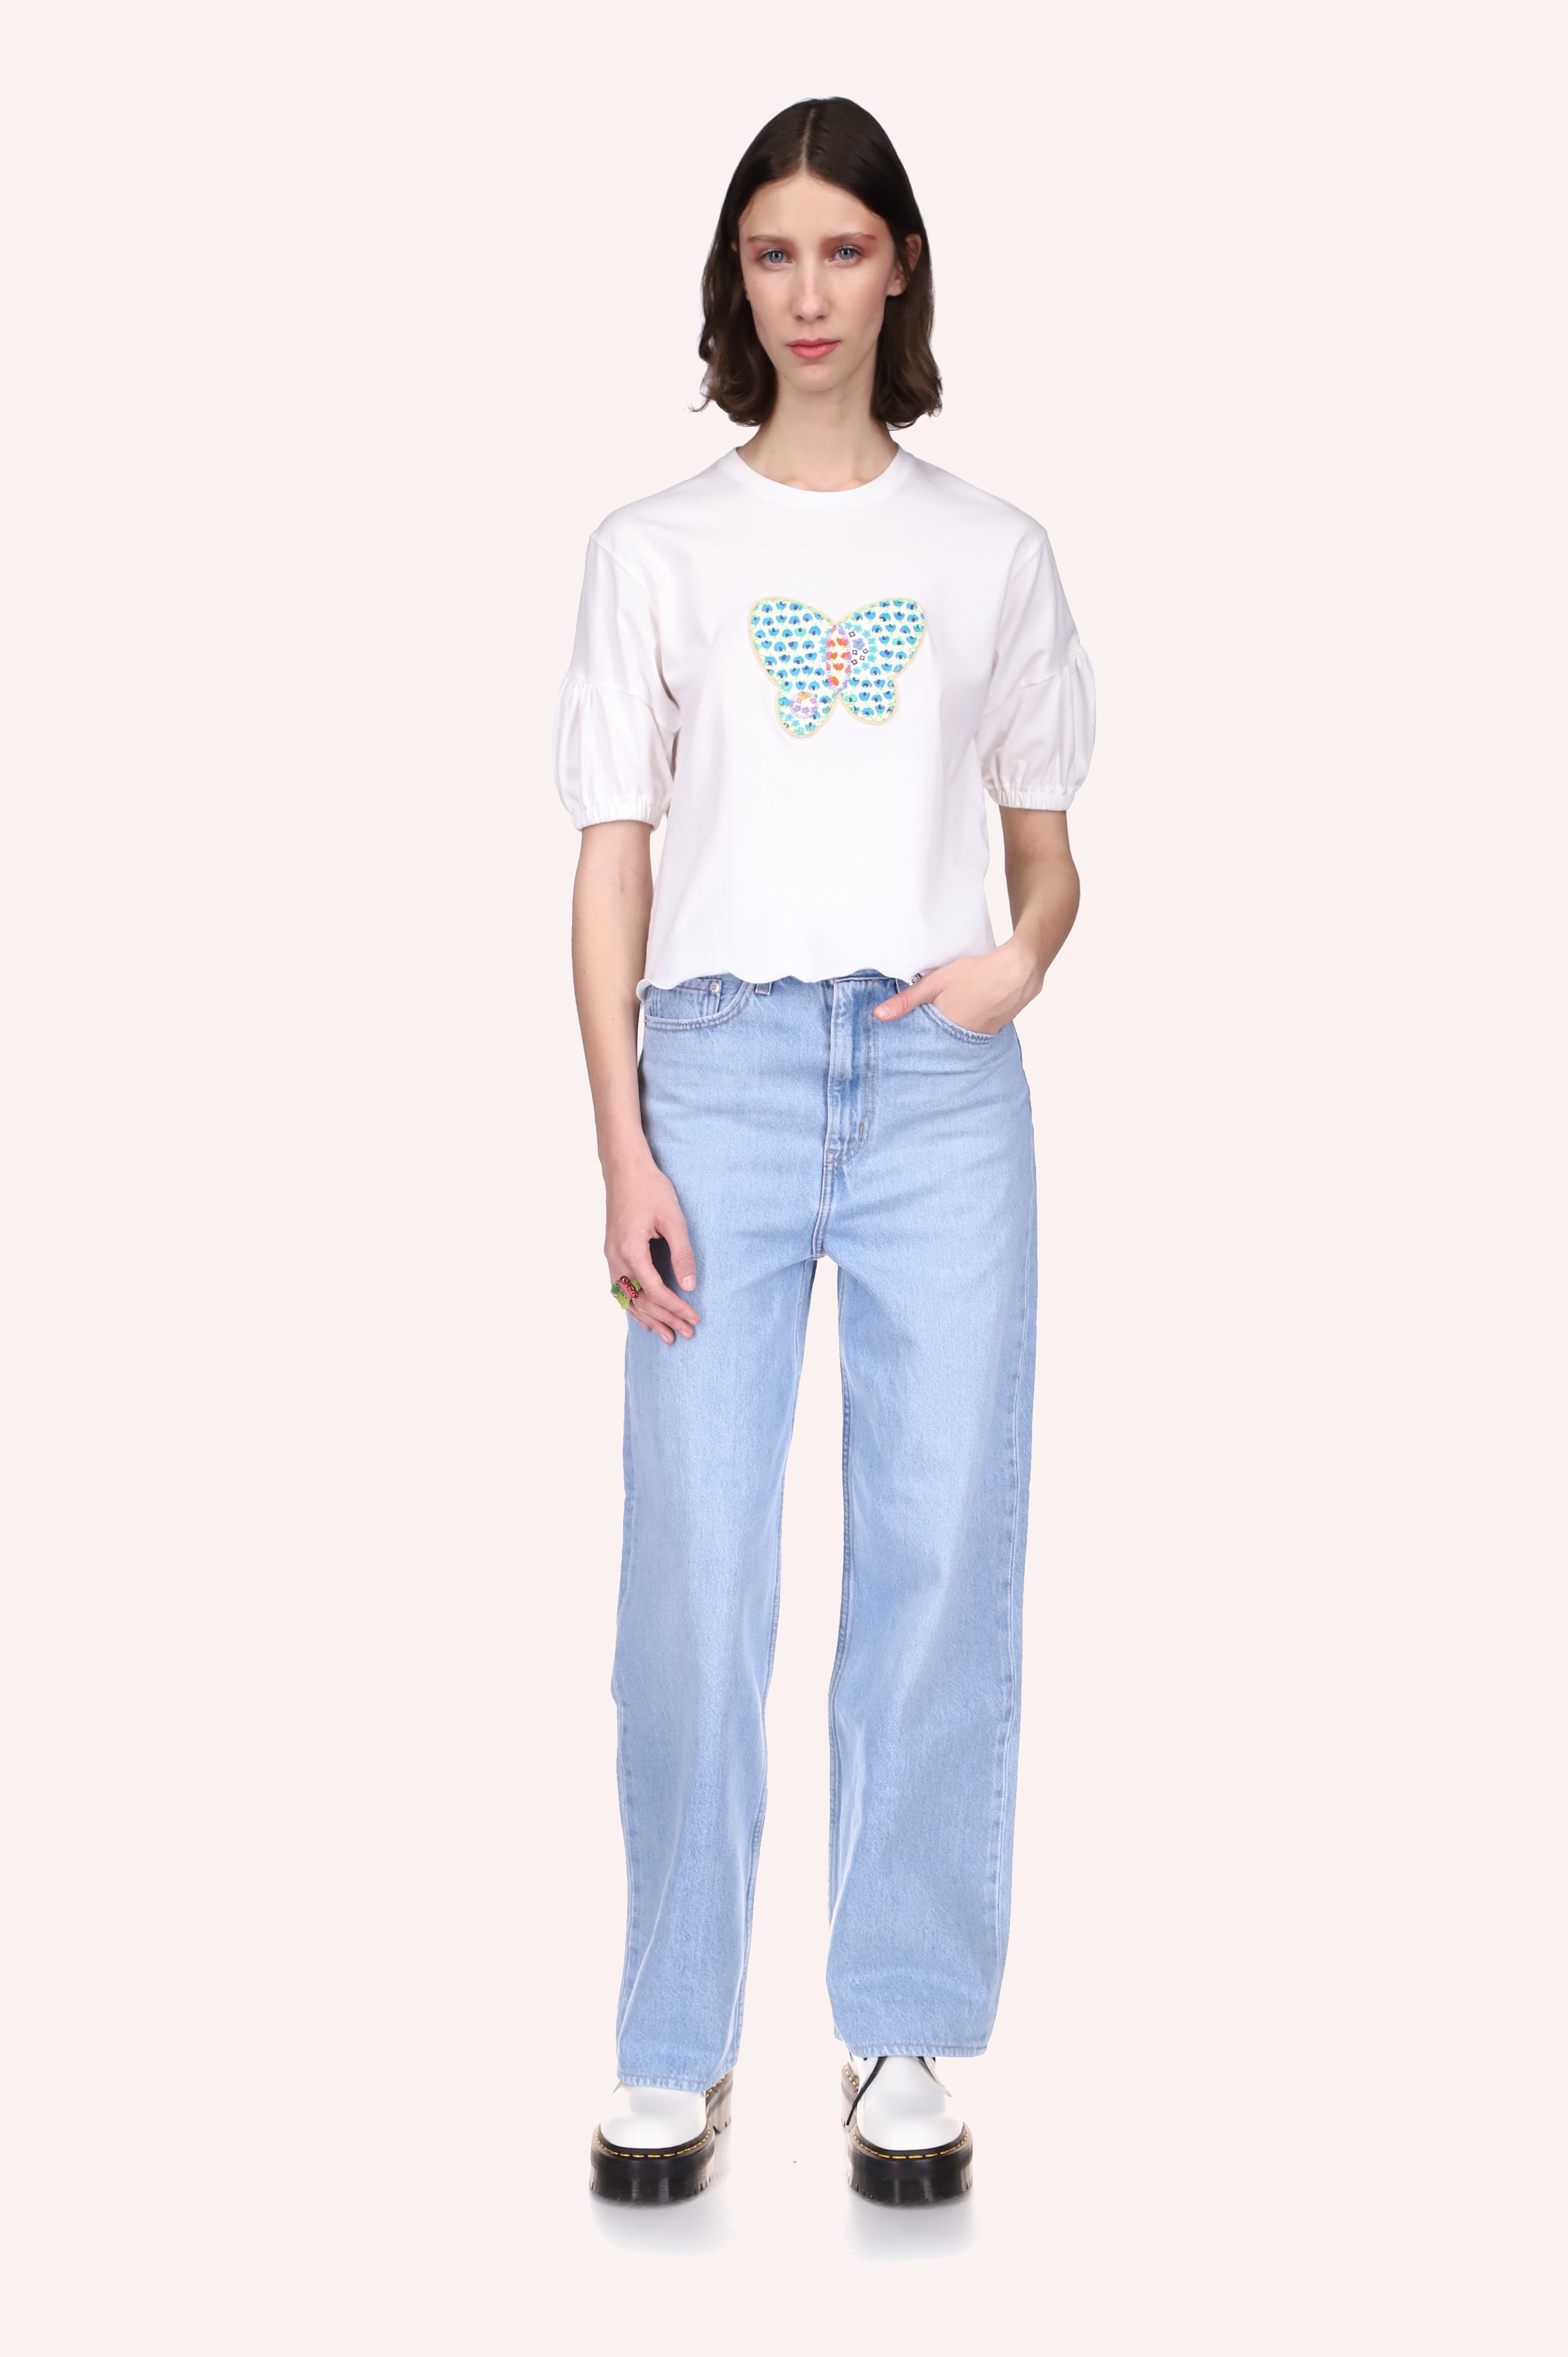 Deco Butterfly Tee - Anna Sui